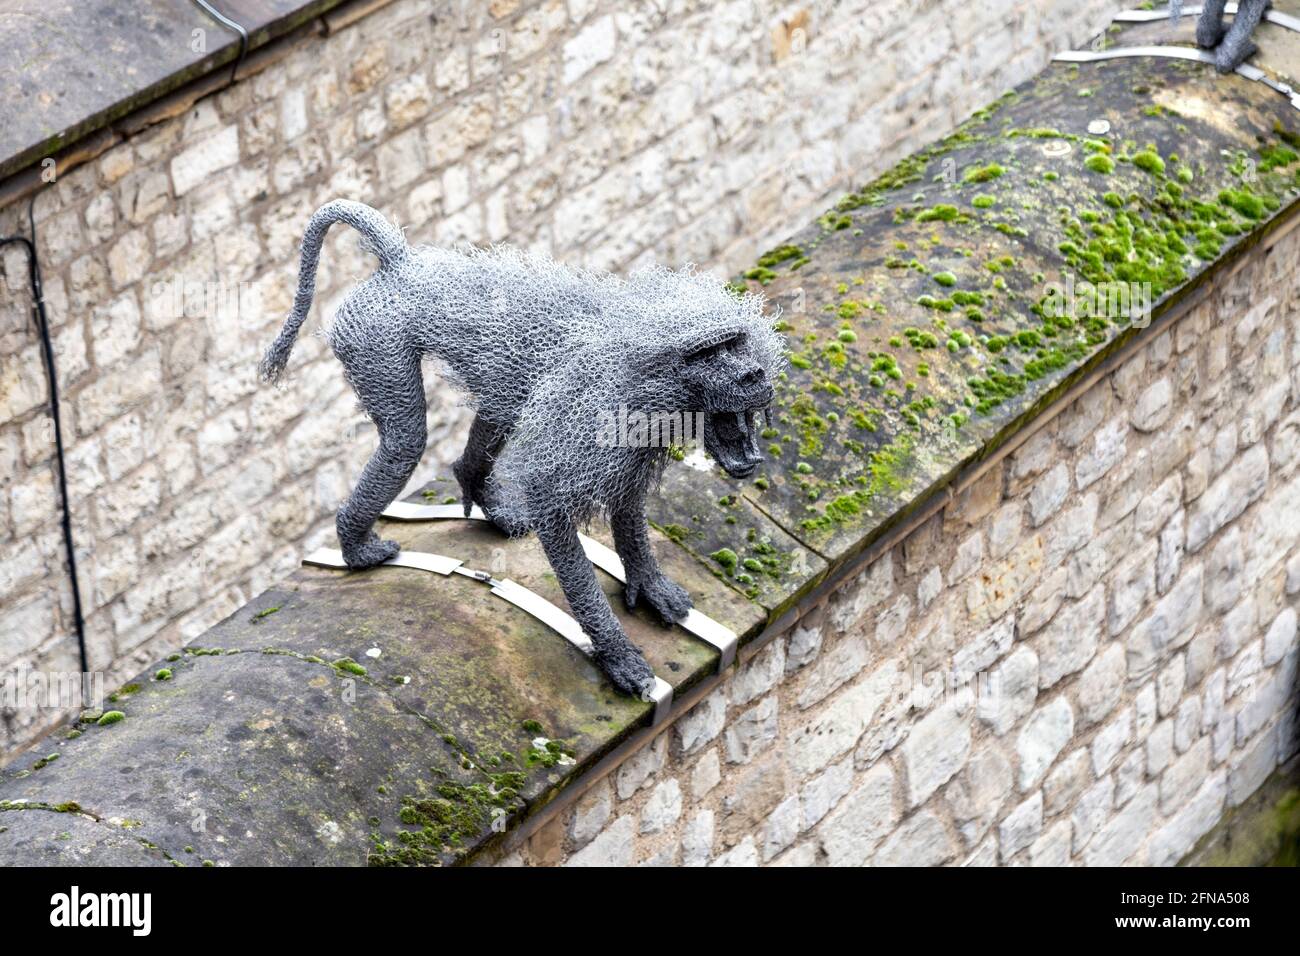 Wire mesh baboon monkey sculpture by artist Kendra Haste at the Tower of London, London, UK Stock Photo